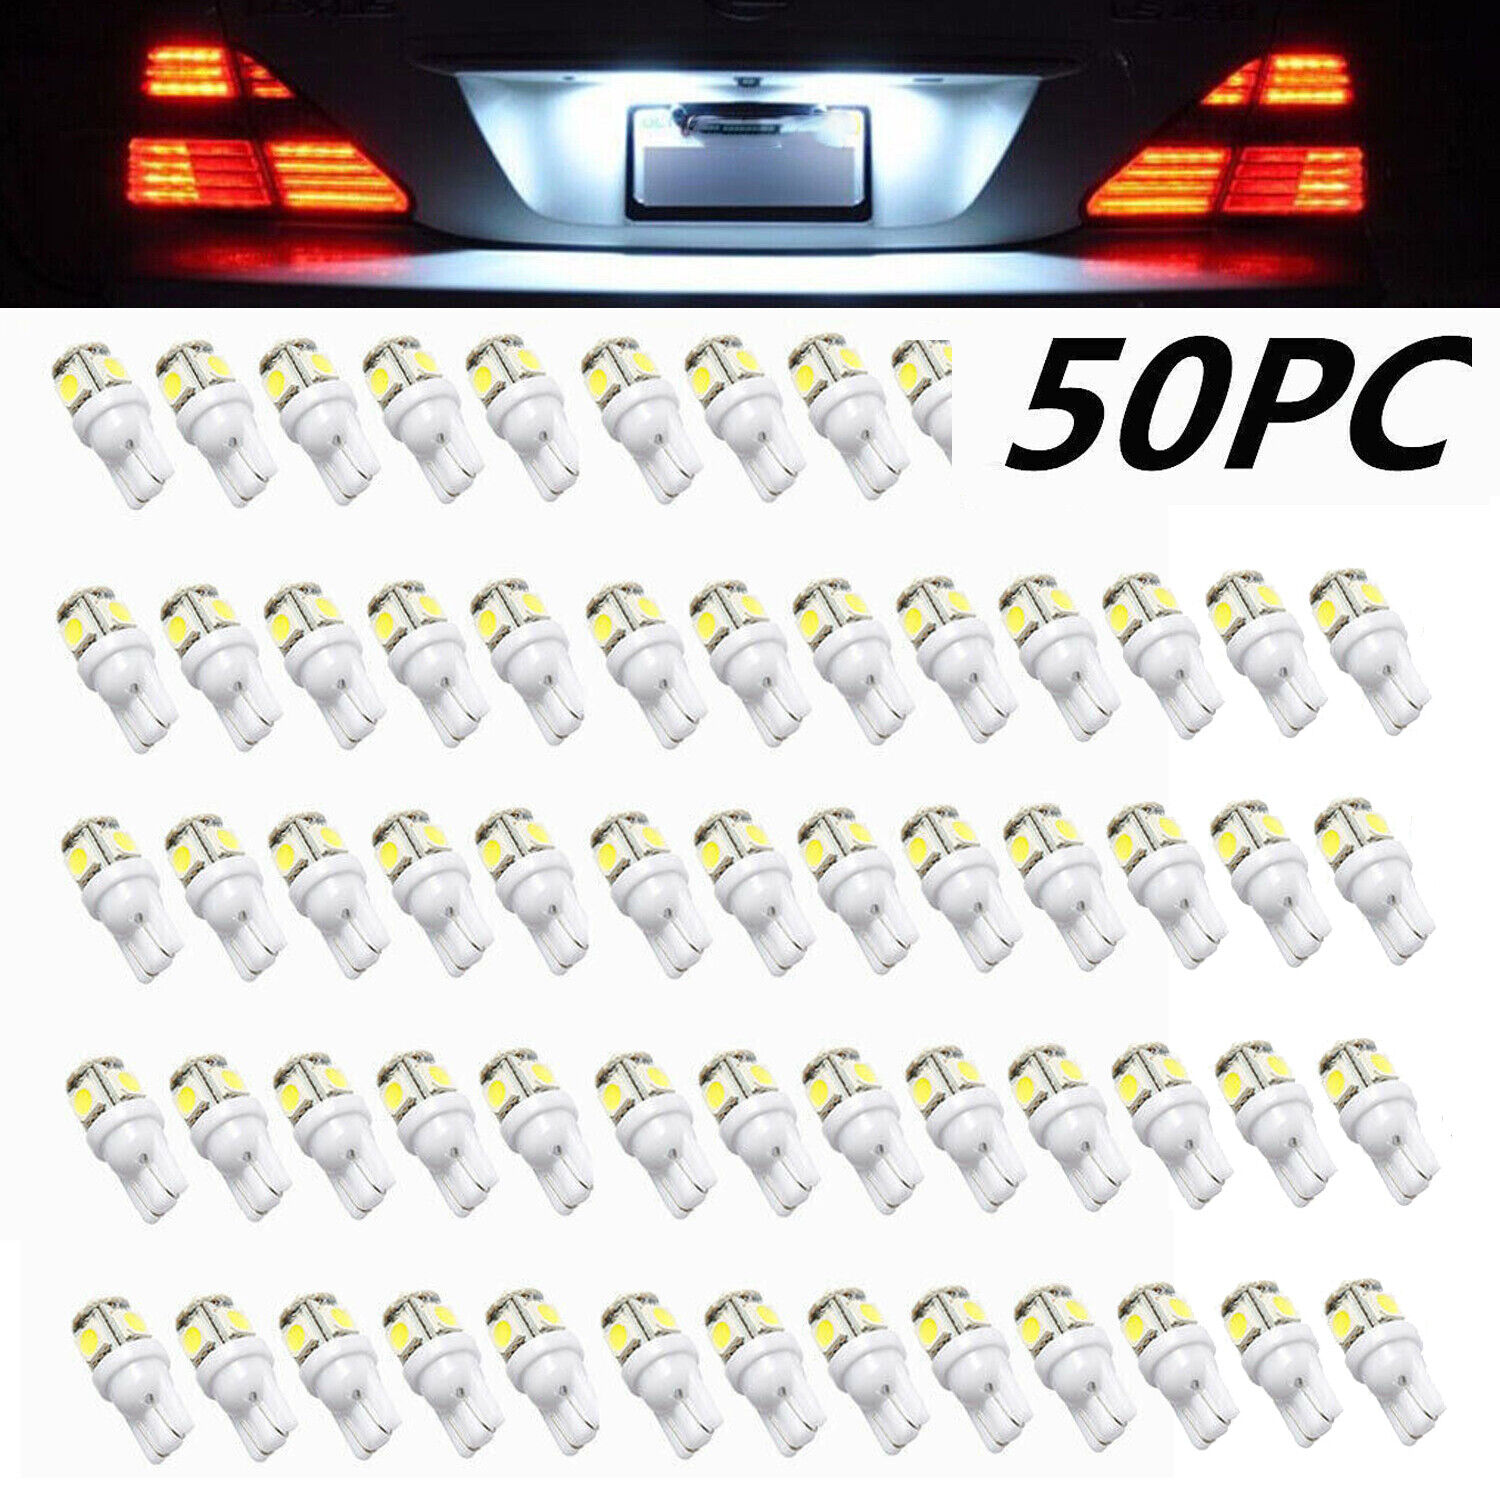 50Pcs Super White T10 Wedge 5-SMD 5050 LED Light bulbs W5W 2825 158 192 168 194 ANYHOW Does Not Apply